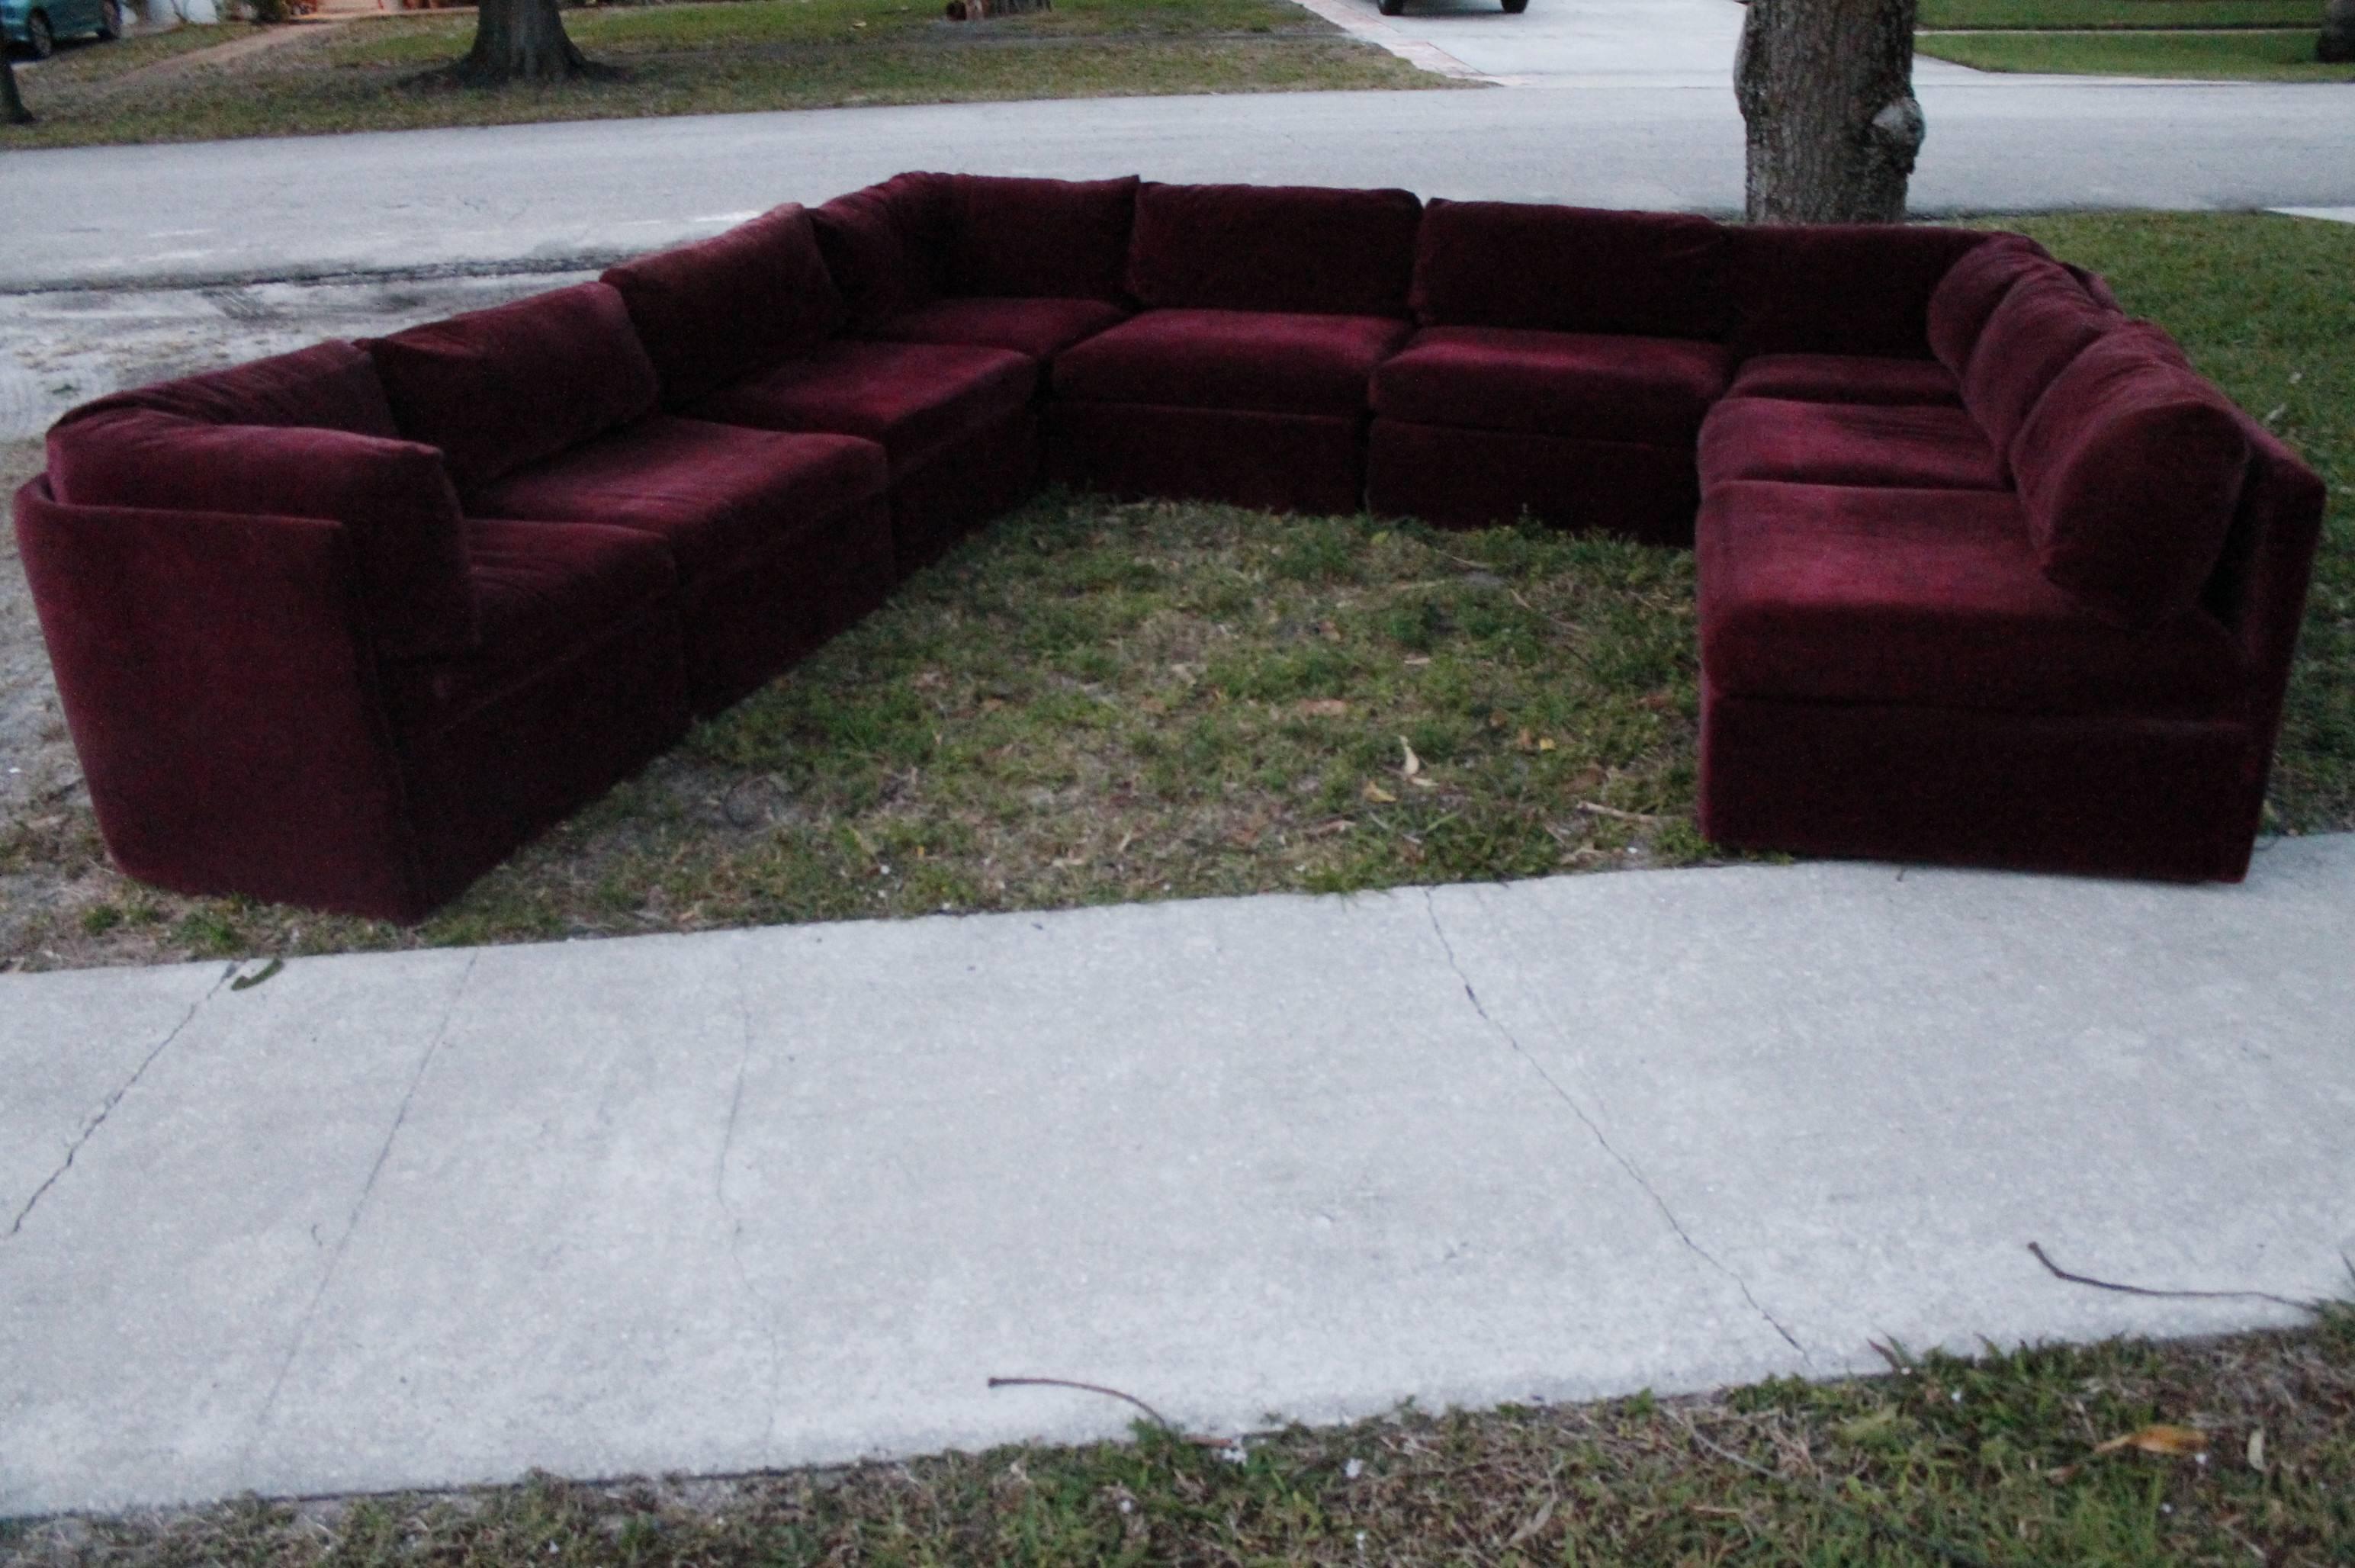 Amazing vintage Hollywood Palm Beach Regency nine piece sectional sofa by Milo Baughman for Thayer Coggin (tagged) (pictured). This can be set up a number of different ways. There are two corner pieces, one arm end piece, six other pieces. This is